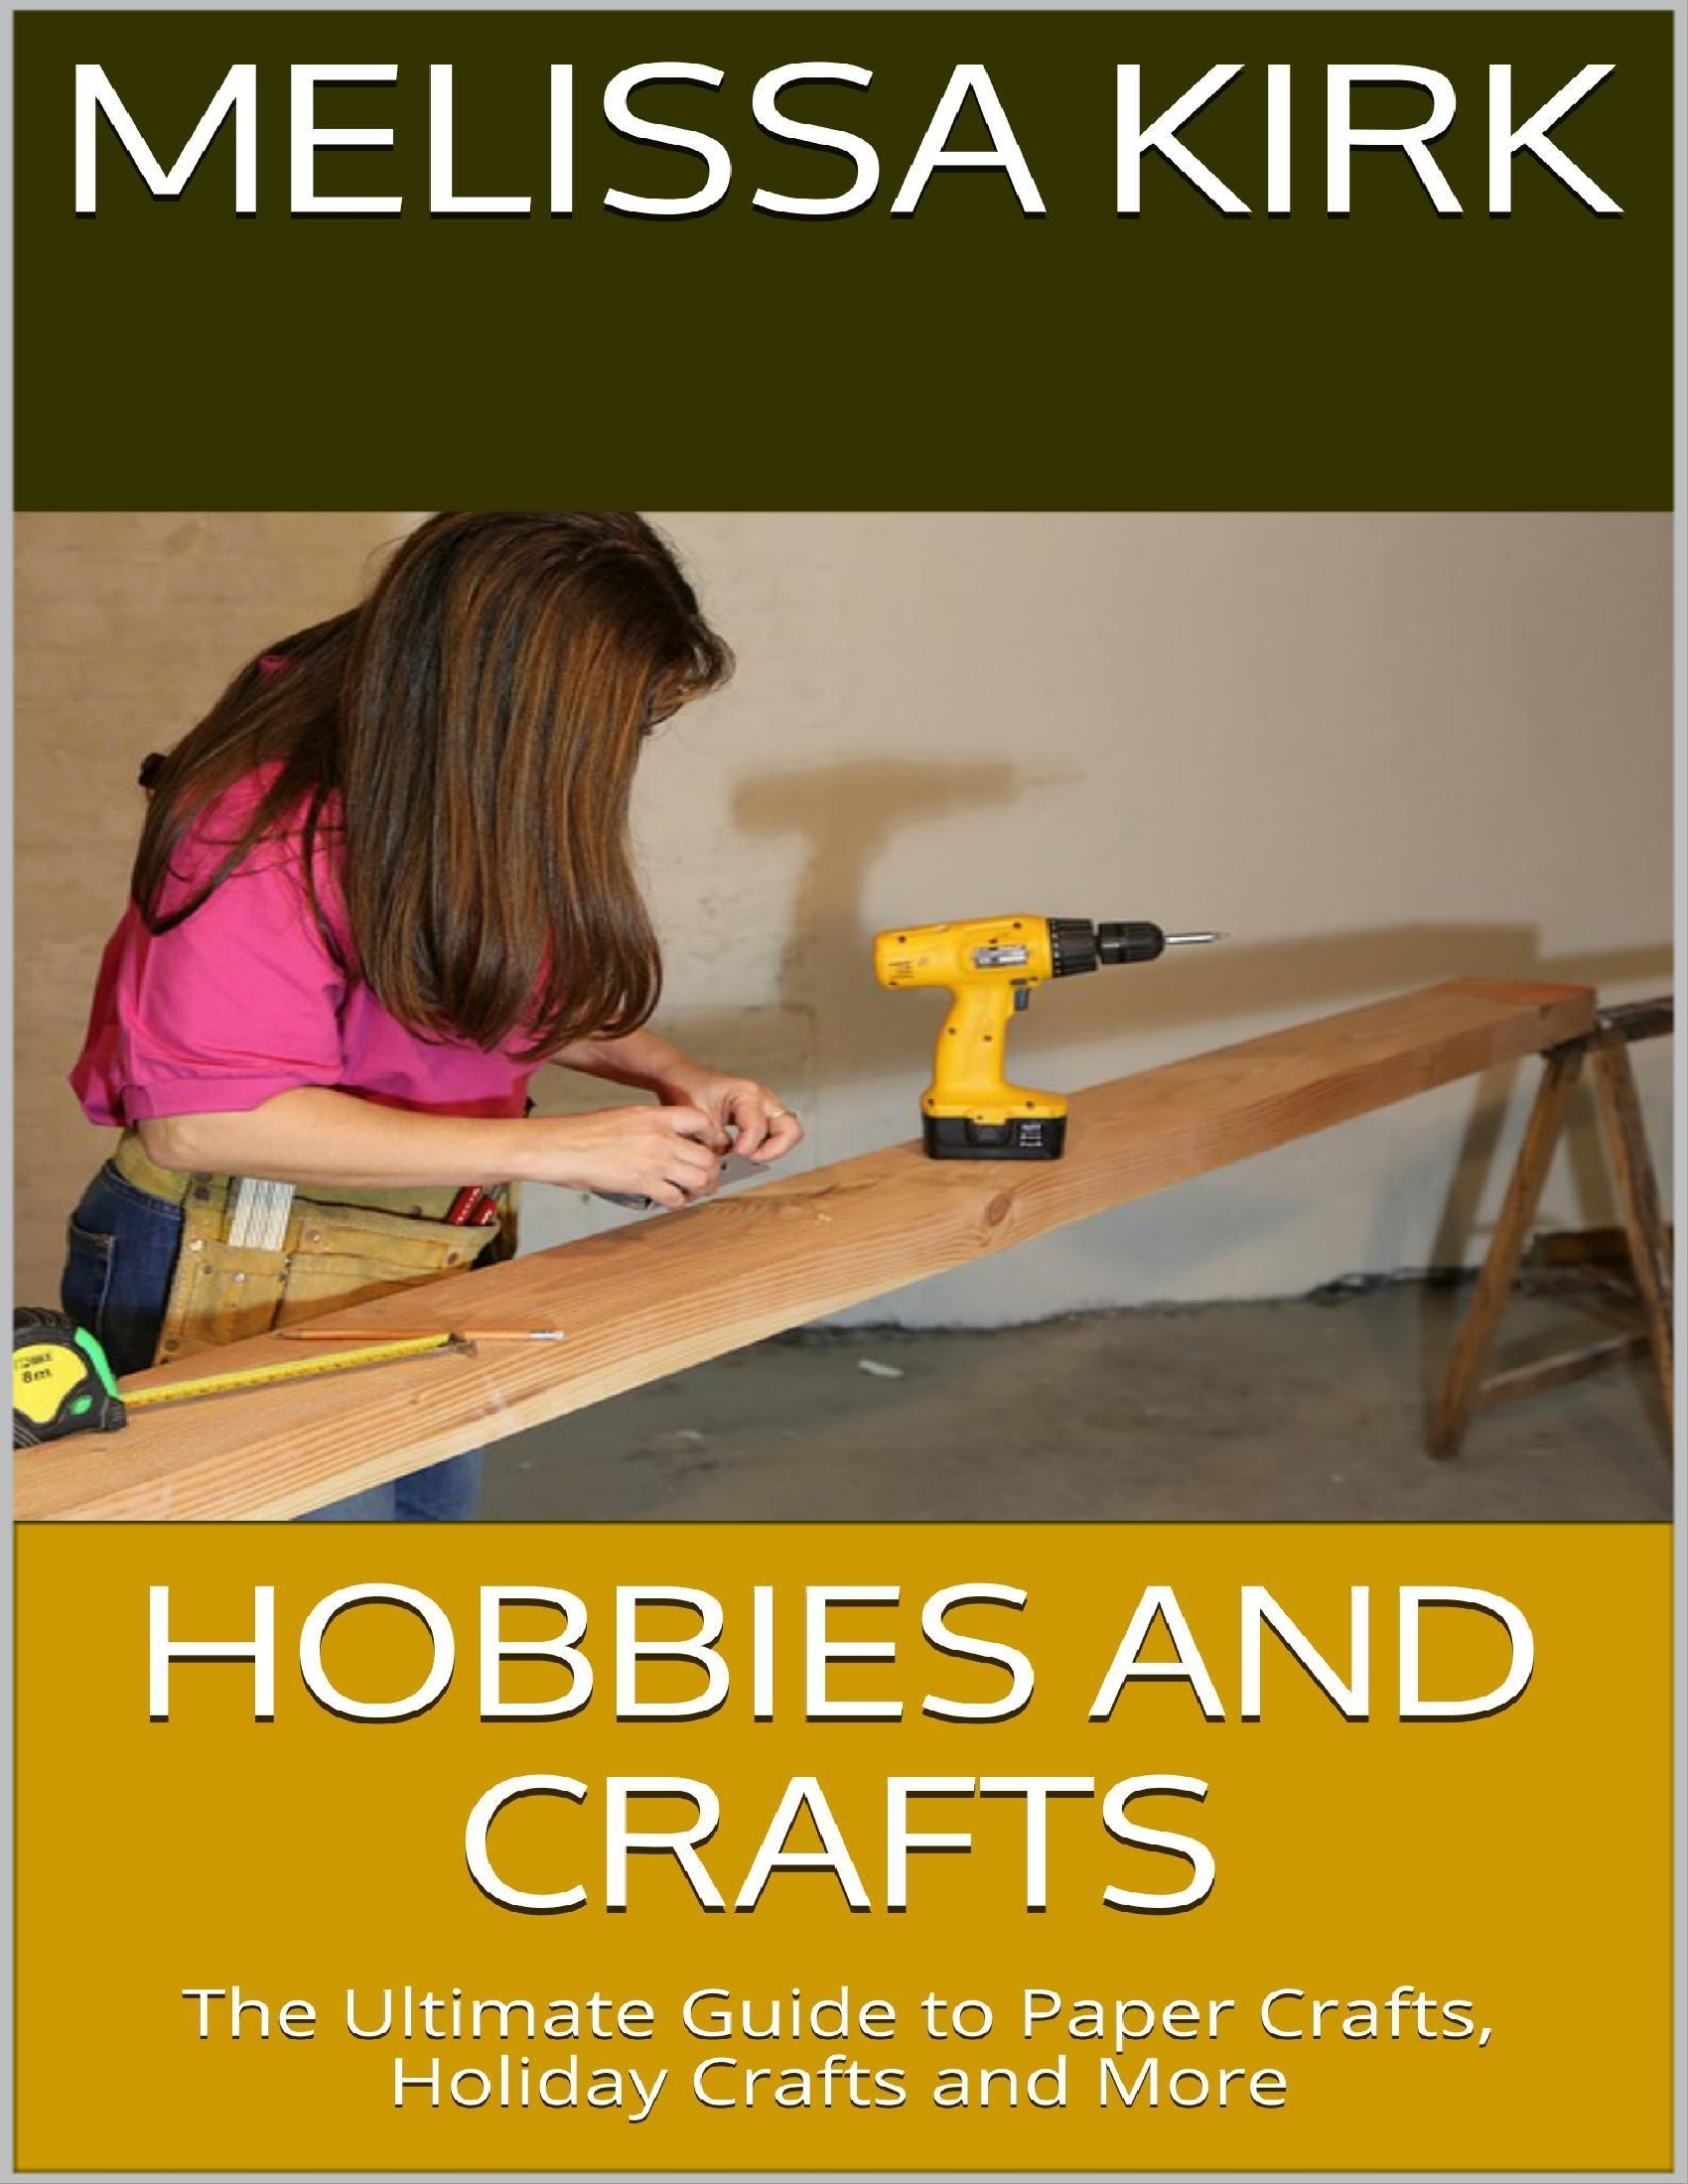 Hobbies and Crafts: The Ultimate Guide to Paper Crafts, Holiday Crafts and More